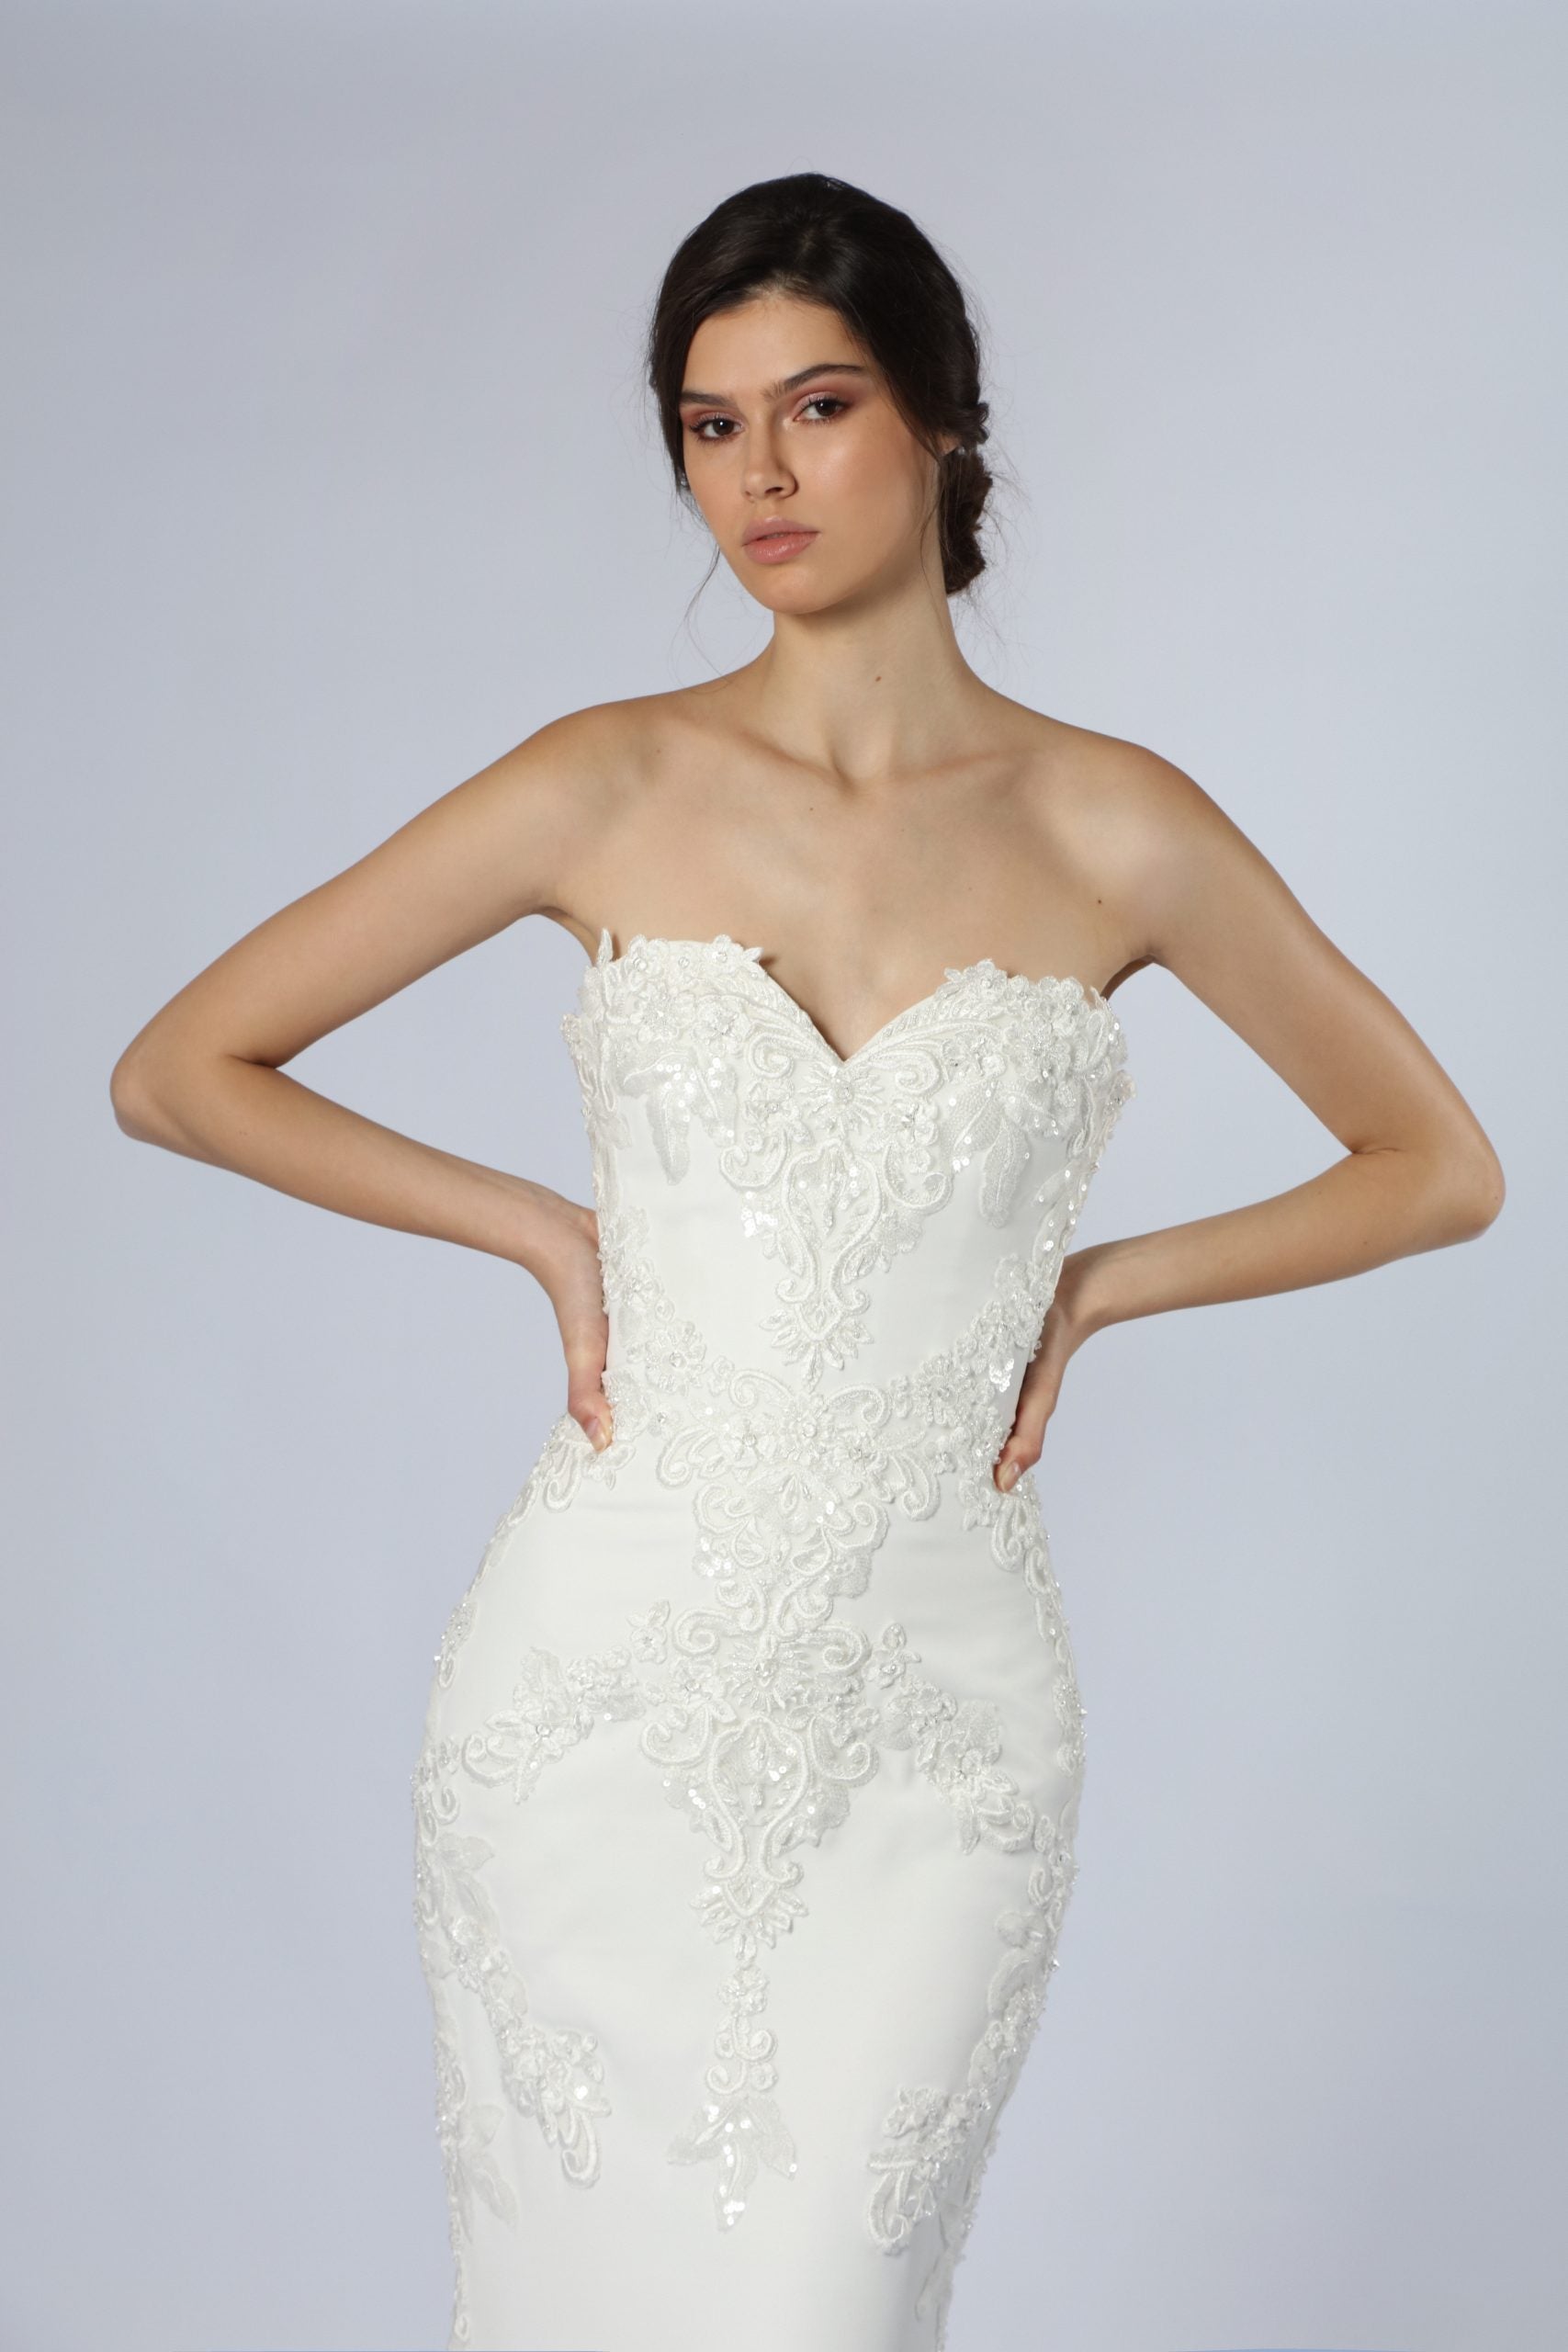 Strapless Sweetheart Fit-and-Flare Gown by Tony Ward - Image 2